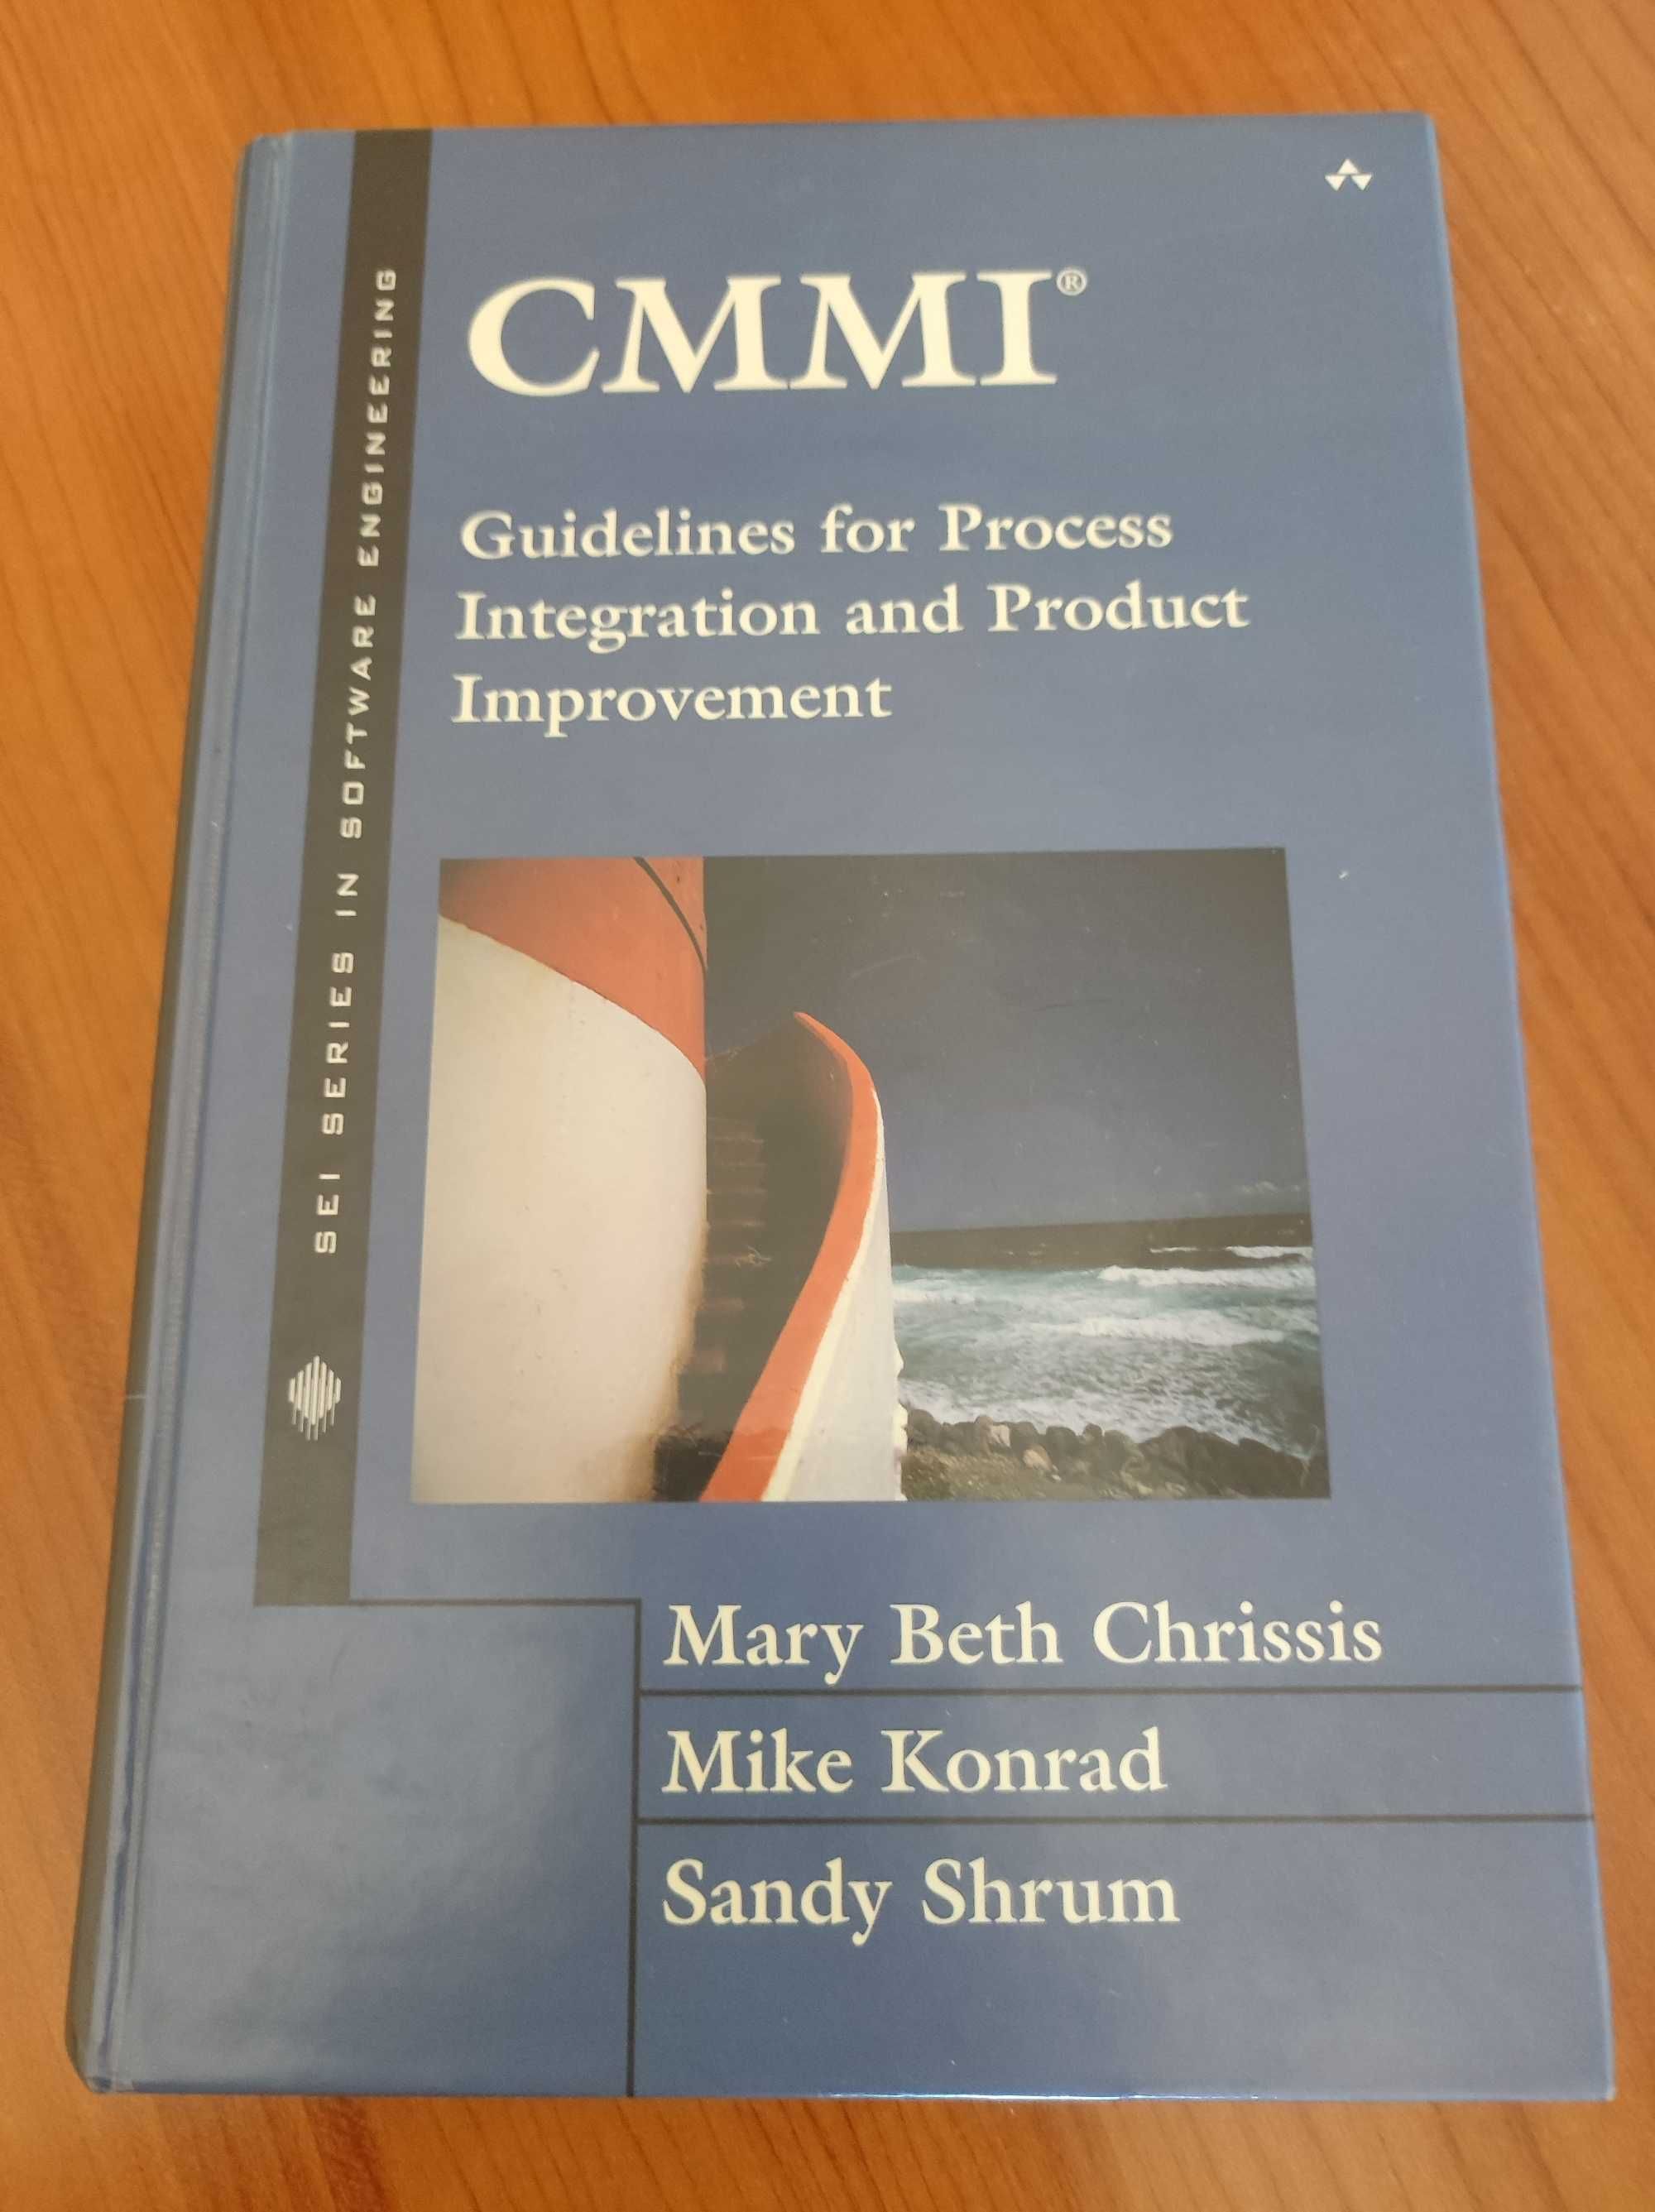 Livro CMMI: Guidelines for Process Integration and Product Improvement